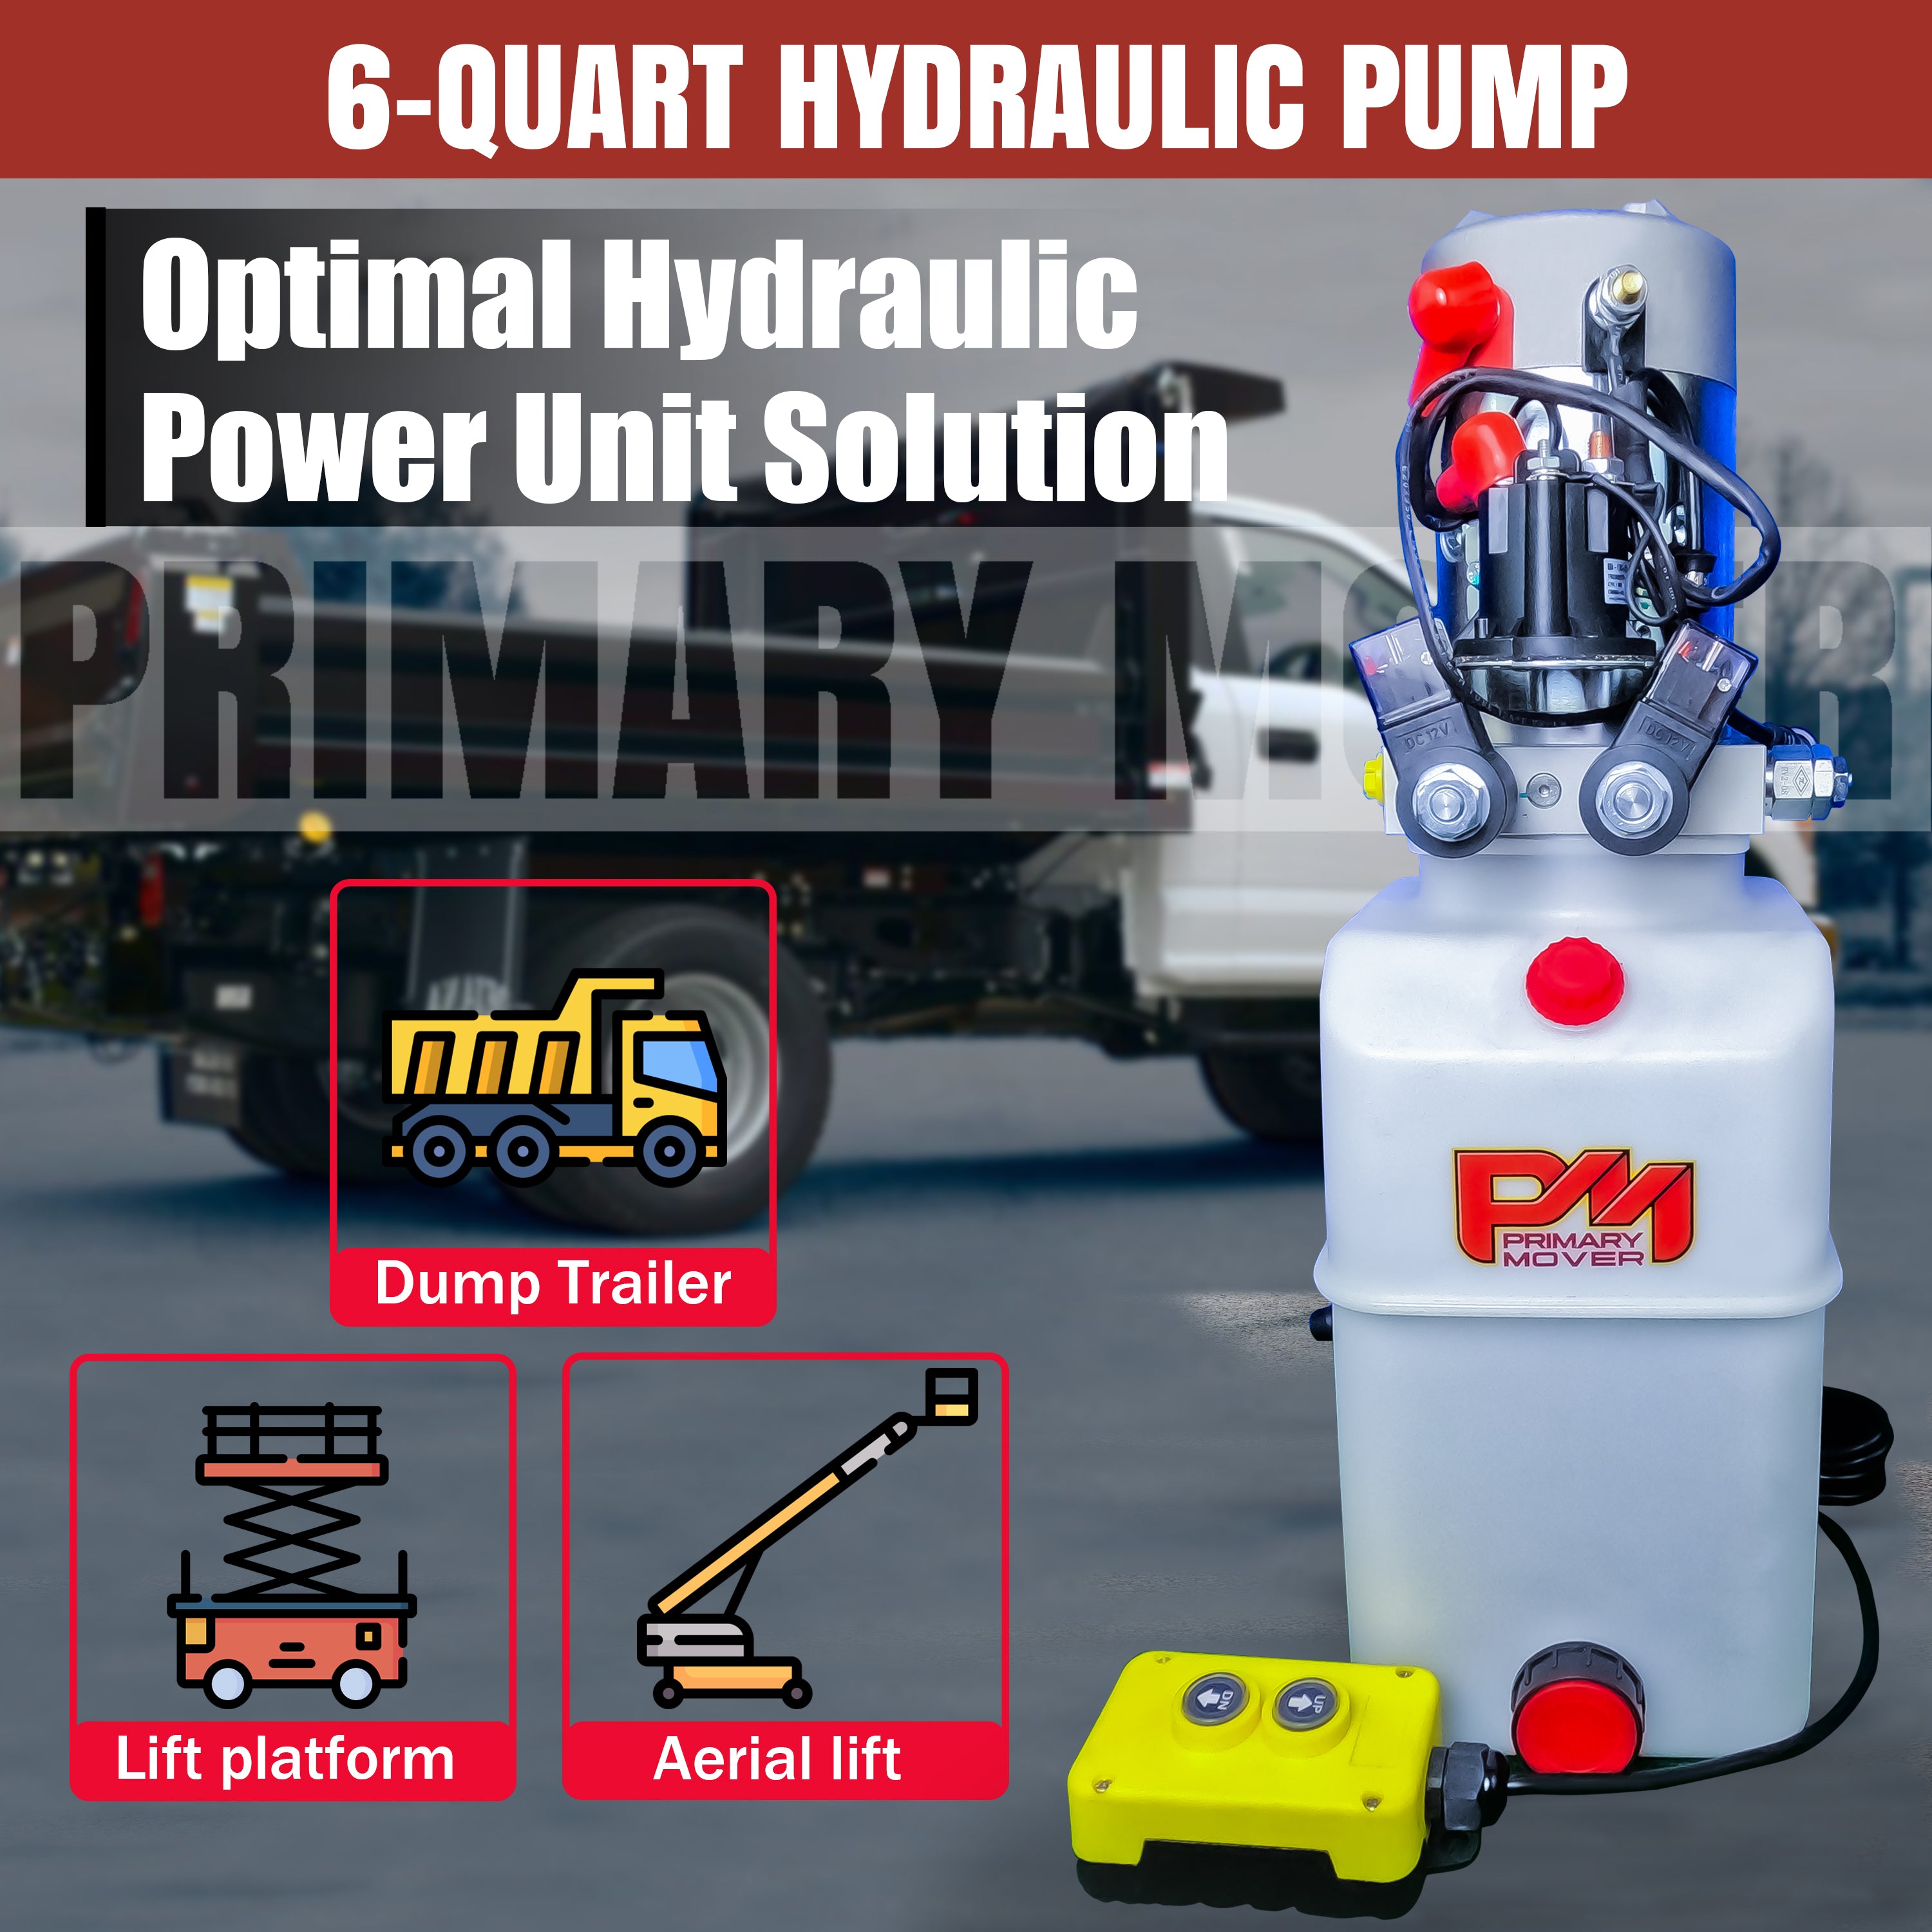 Primary Mover 12V Double-Acting Hydraulic Pump - Precision crafted with dual-acting functionality for hydraulic dump bed systems. Includes hand-held pendant and 1-year warranty.